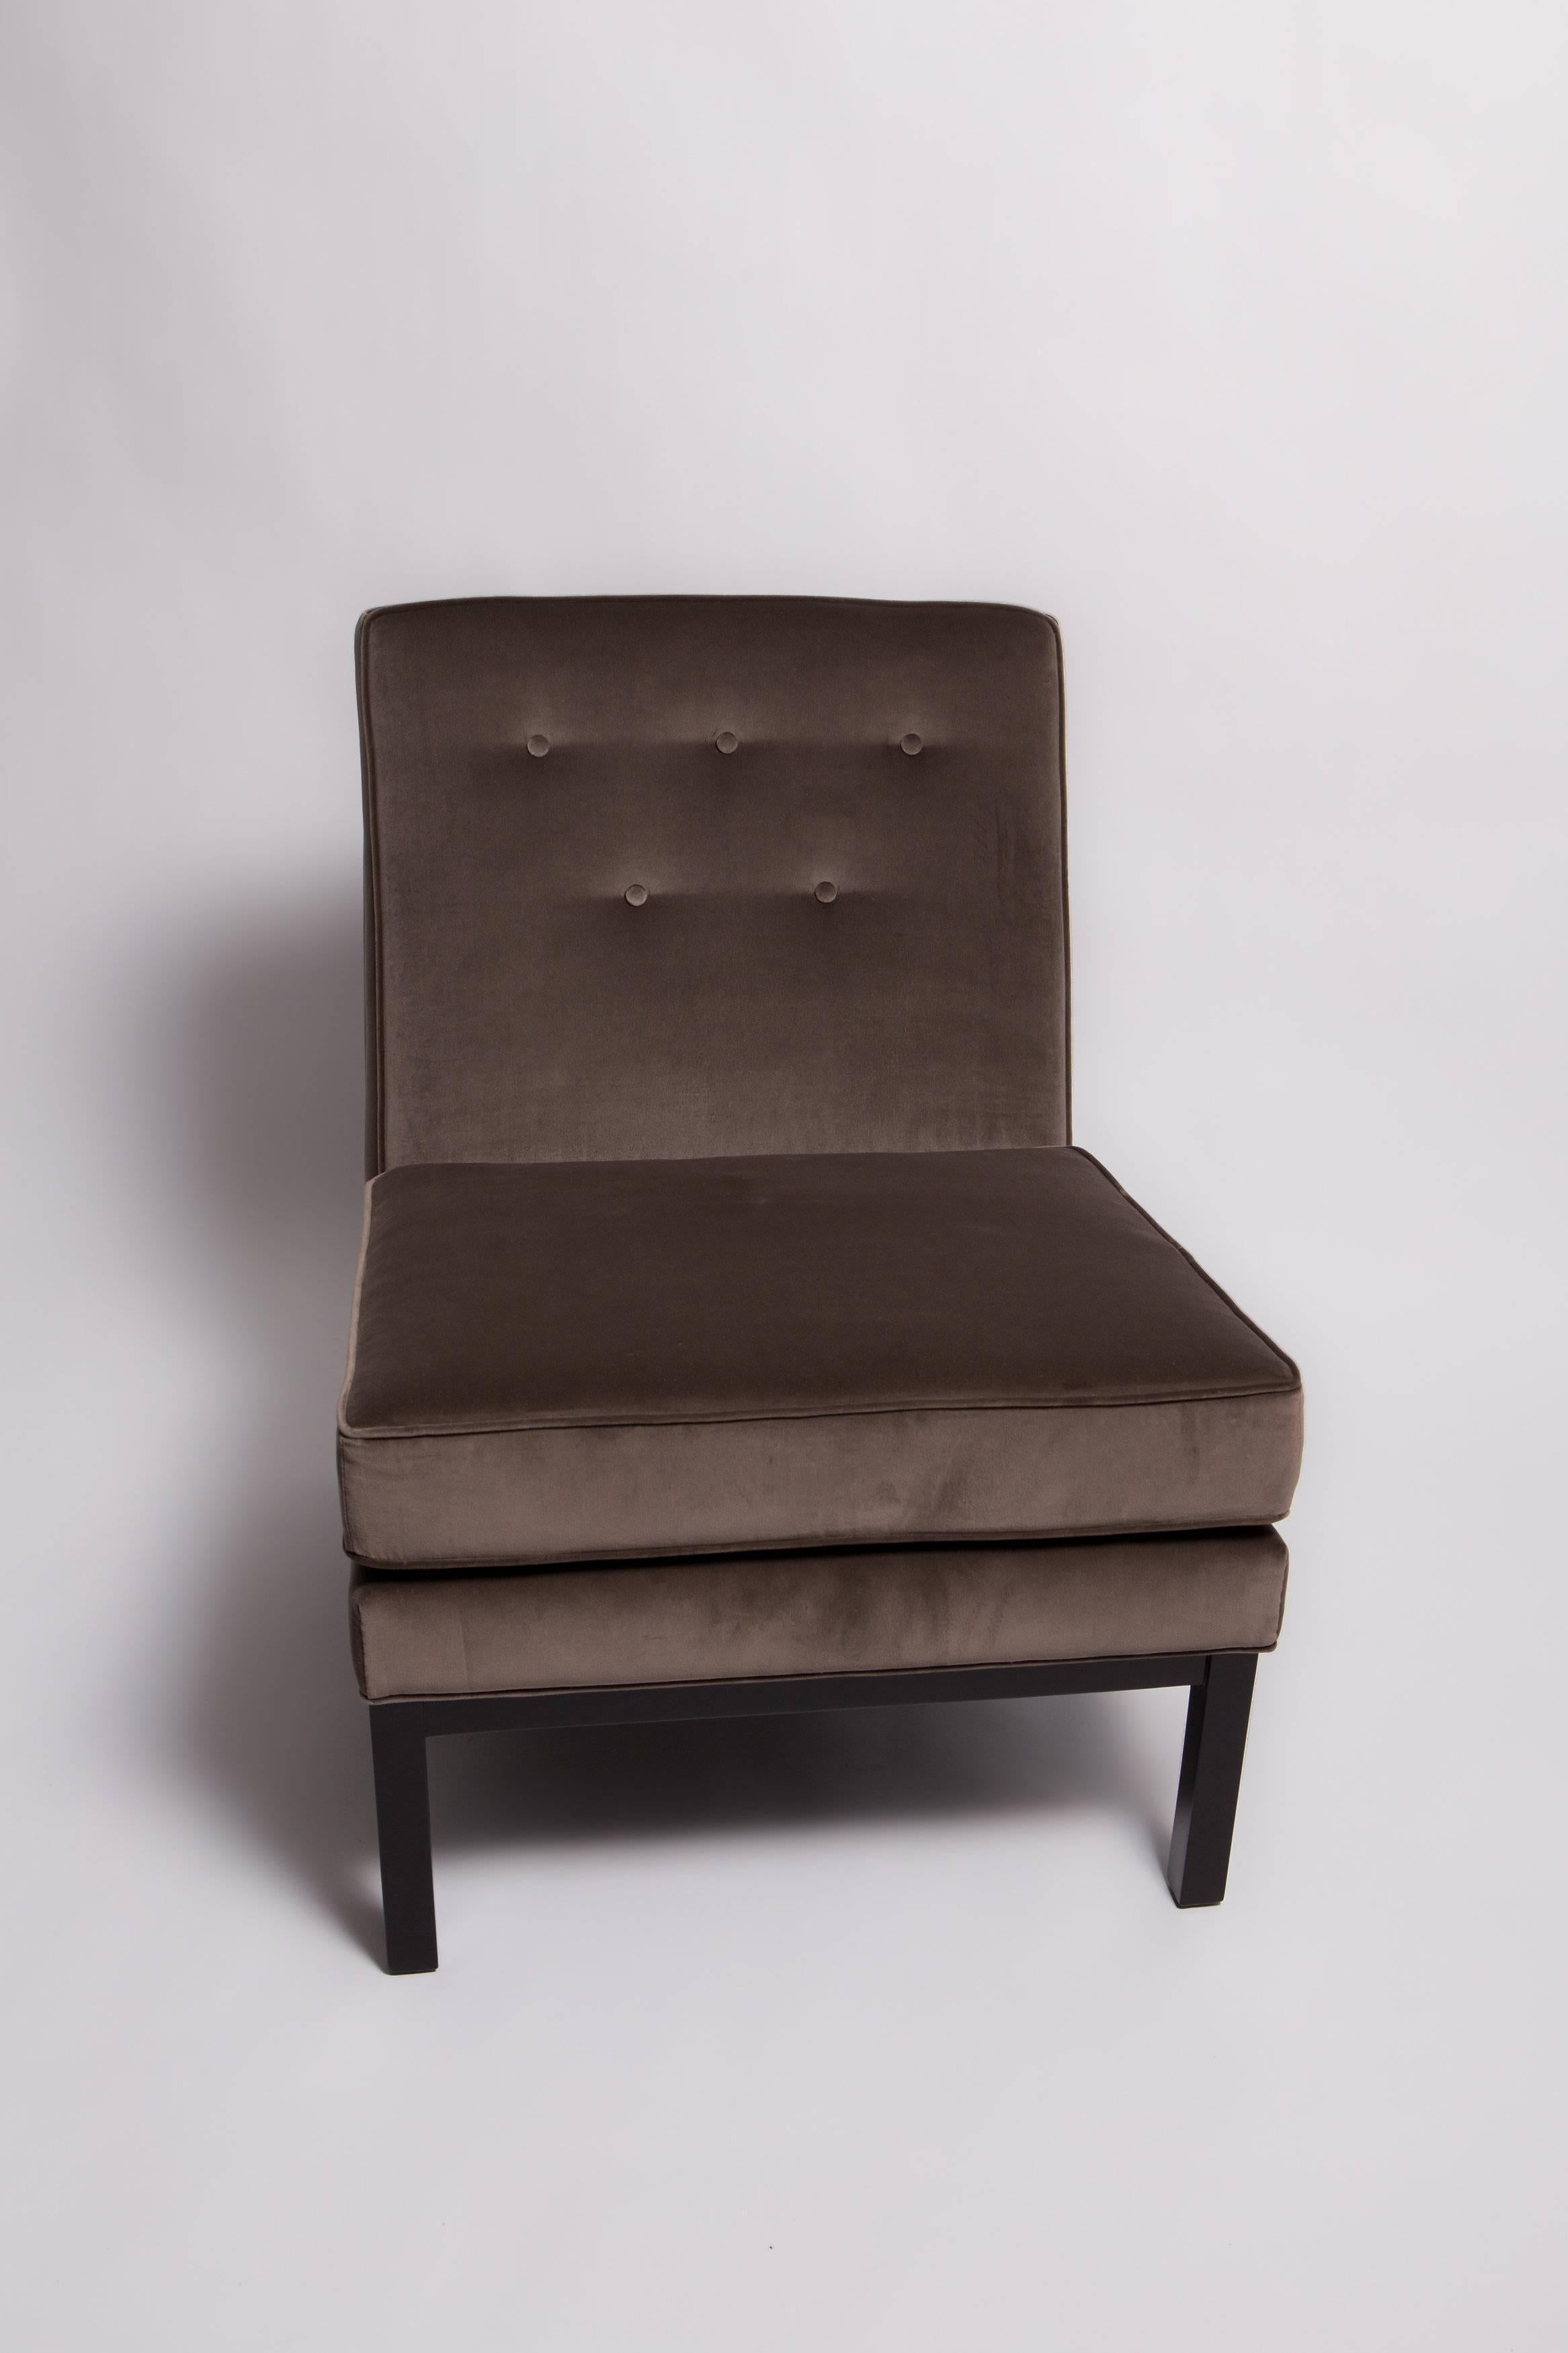 1950s lounge chair and ottoman, reupholstered in a plush gray velvet.